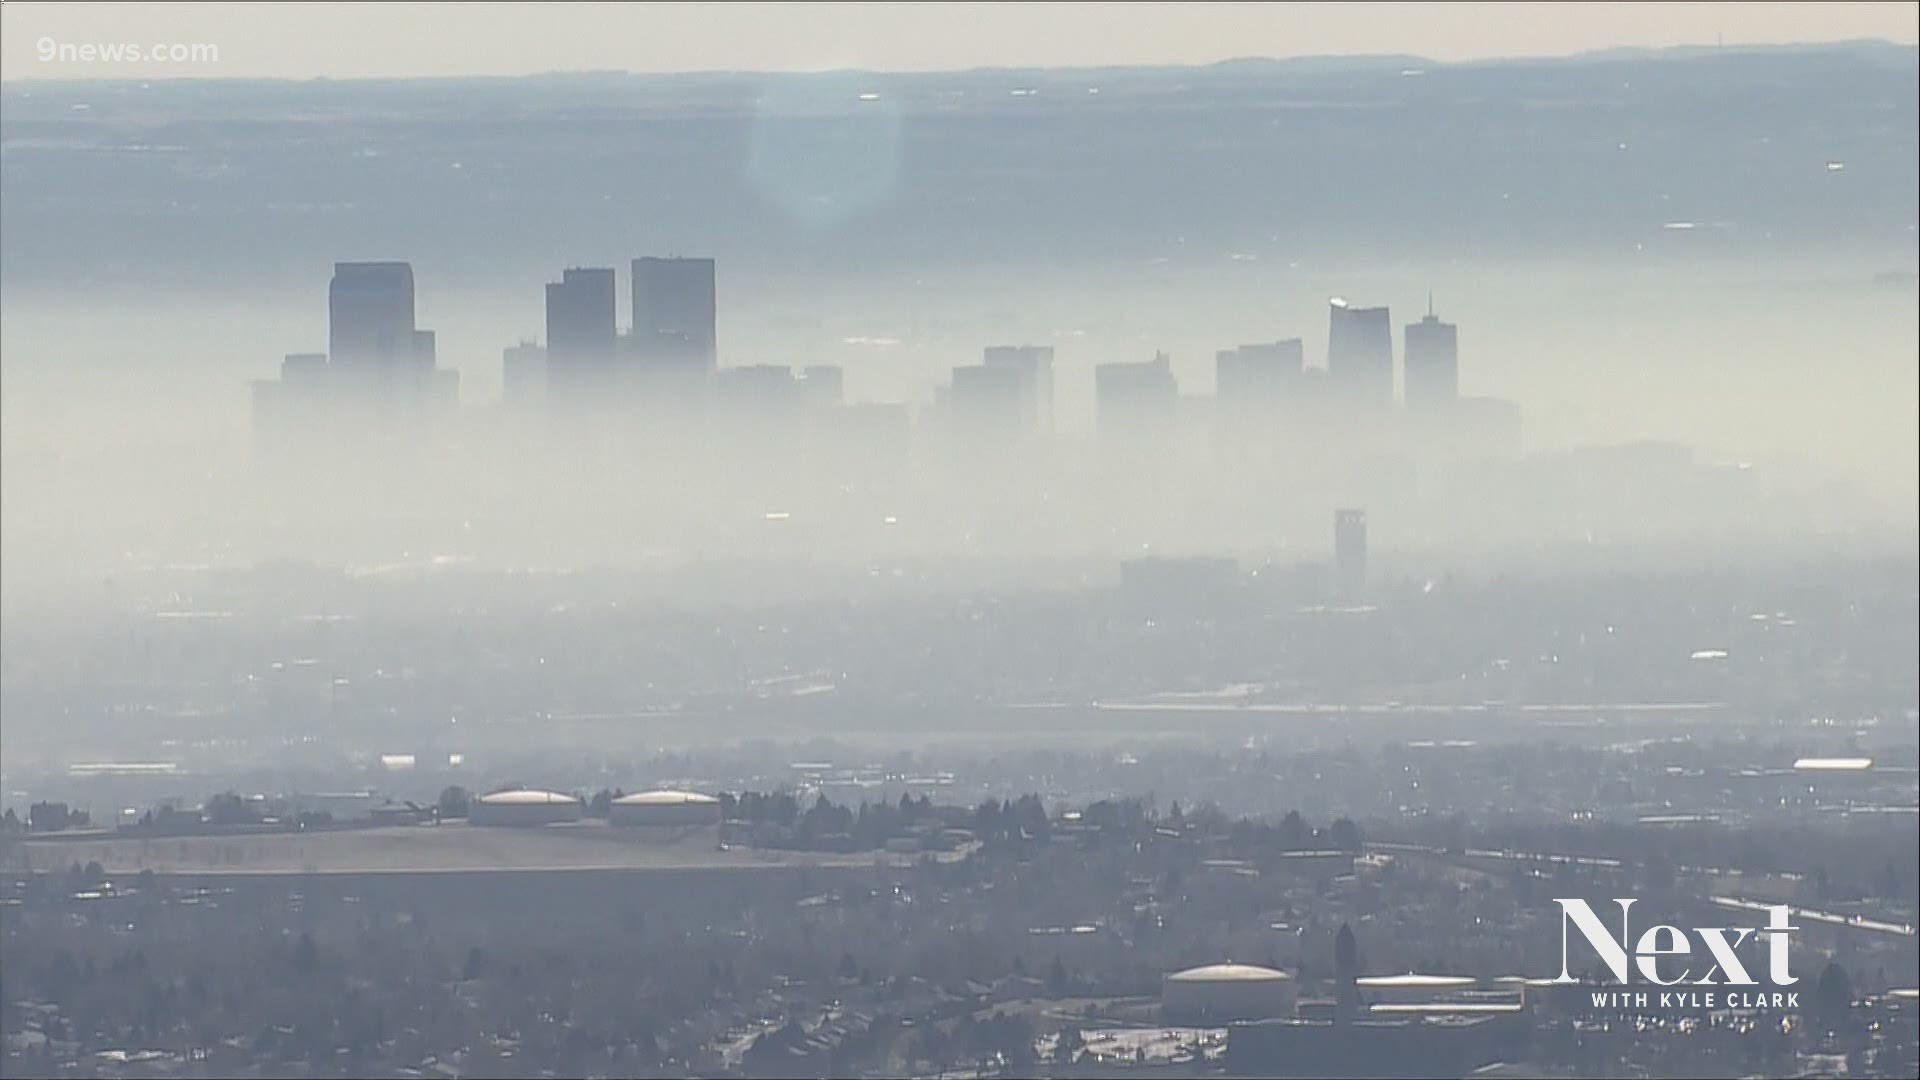 Denver's had a recent streak of bad air quality. The mix of wildfire smoke and ground ozone pollution is a different brew than the brown cloud of the 70s and 80s.